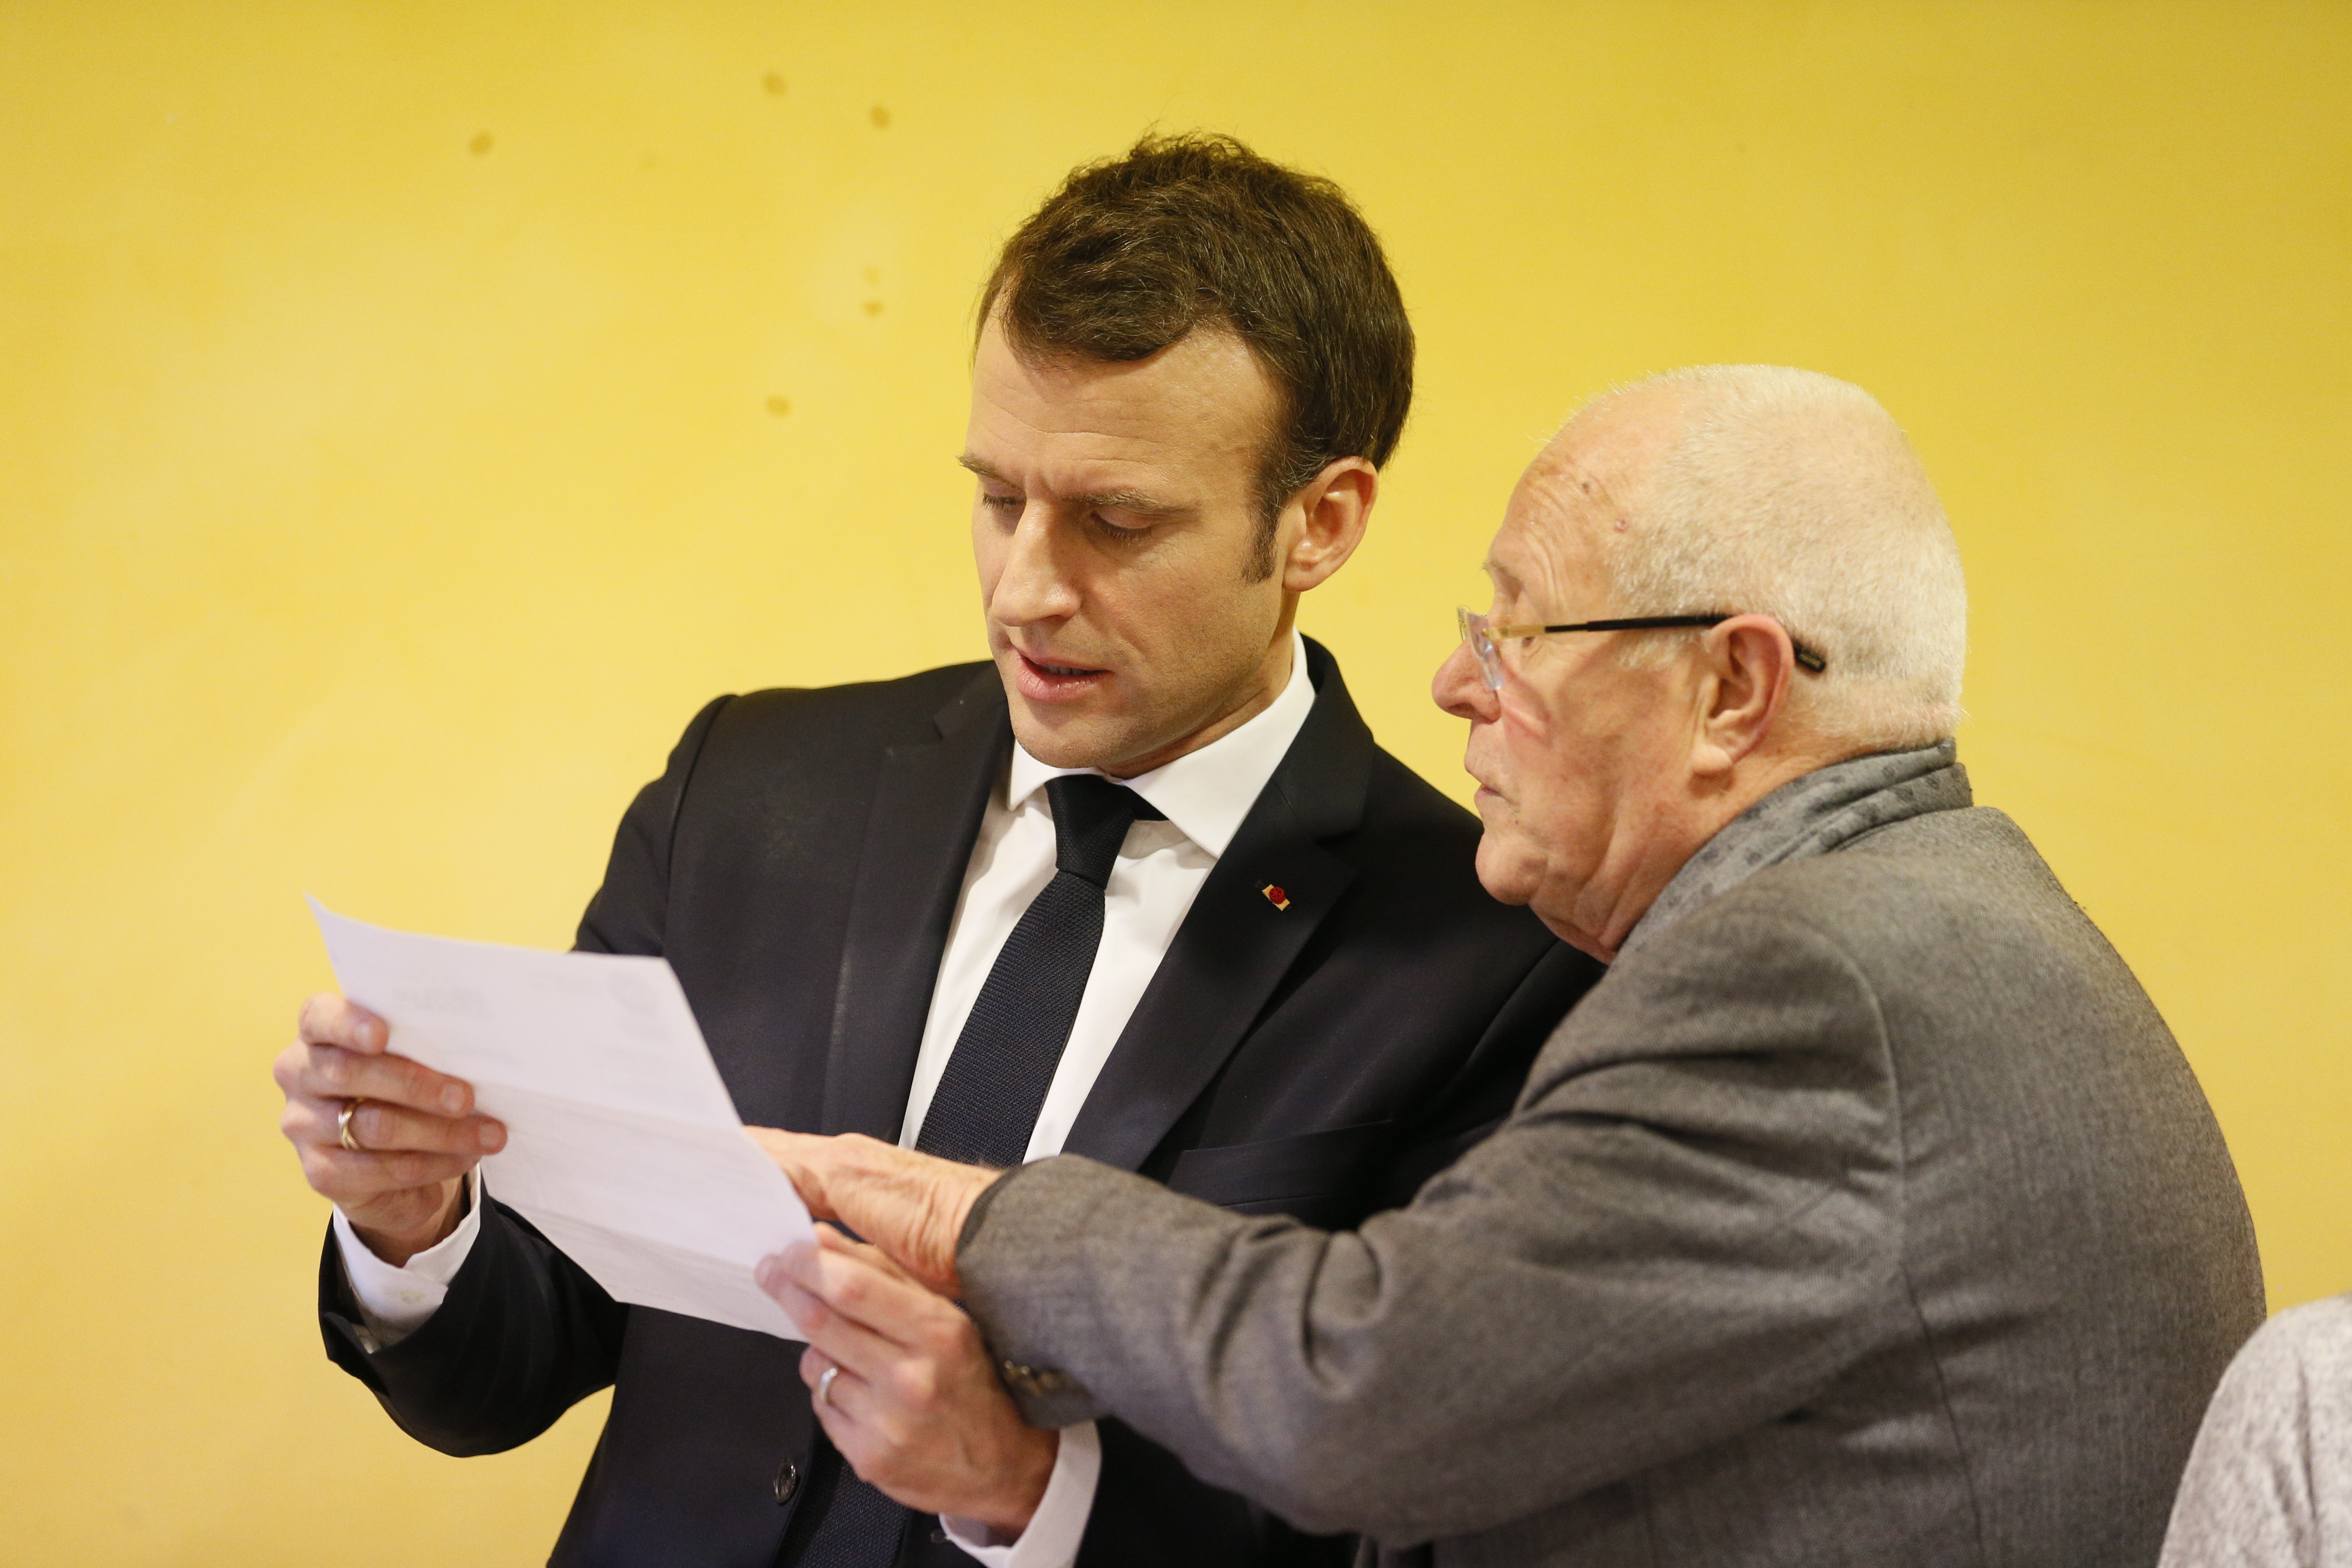 epa07316083 French President Emmanuel Macron (L) speaks to an elderly man at the day center Le Clos de l'Hermitage in Bourg-de-Peage near Valence, France, 24 January 2019. Macron visits the region as part of the 'Great National Debate' designed to find ways to calm social unrest in the country.  EPA/EMMANUEL FOUDROT / POOL MAXPPP OUT